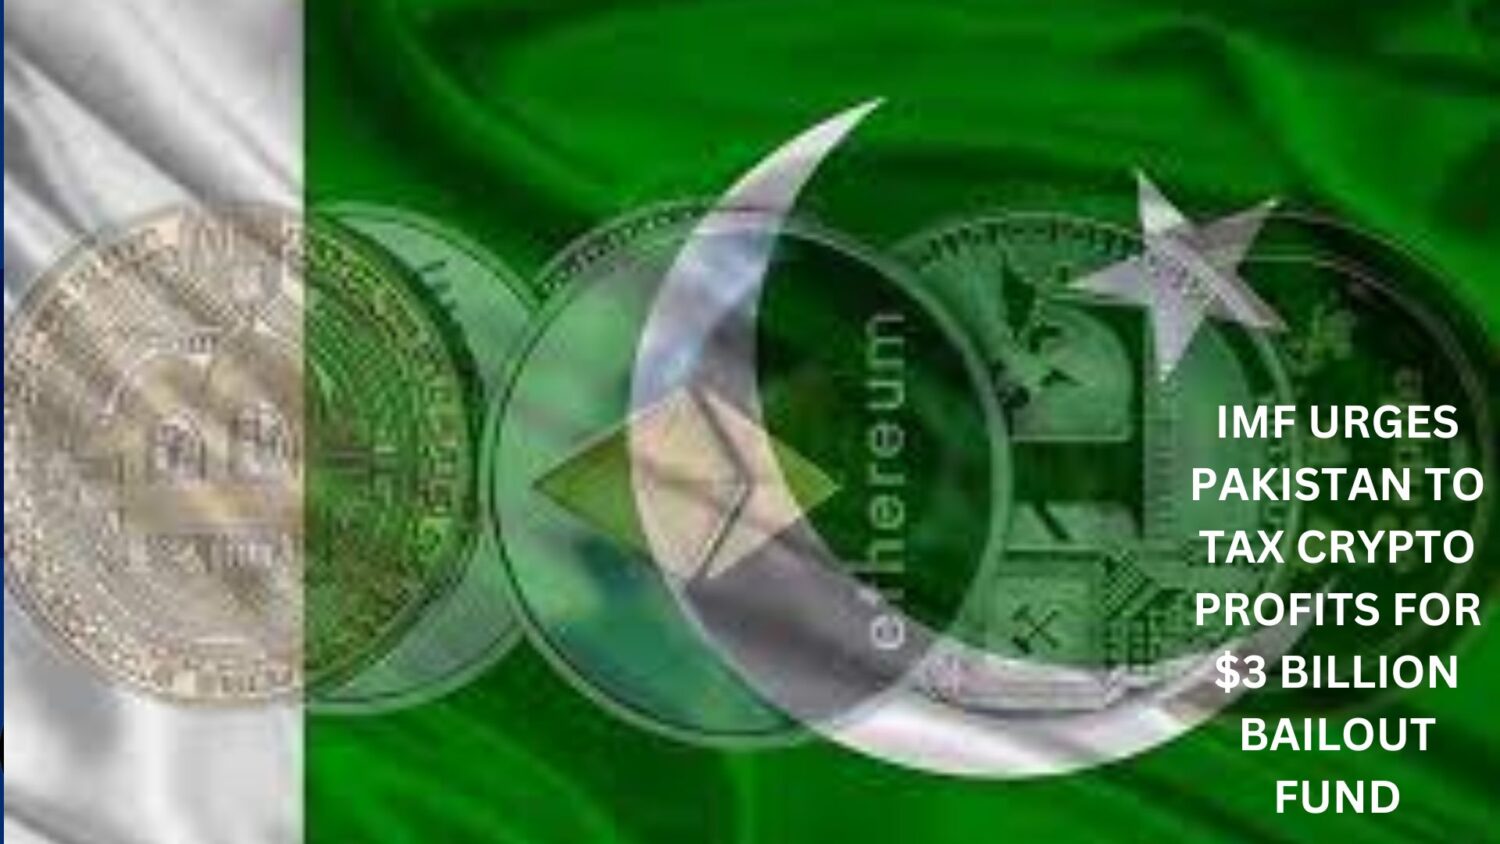 Imf Urges Pakistan To Tax Crypto Profits For $3B Bailout Fund